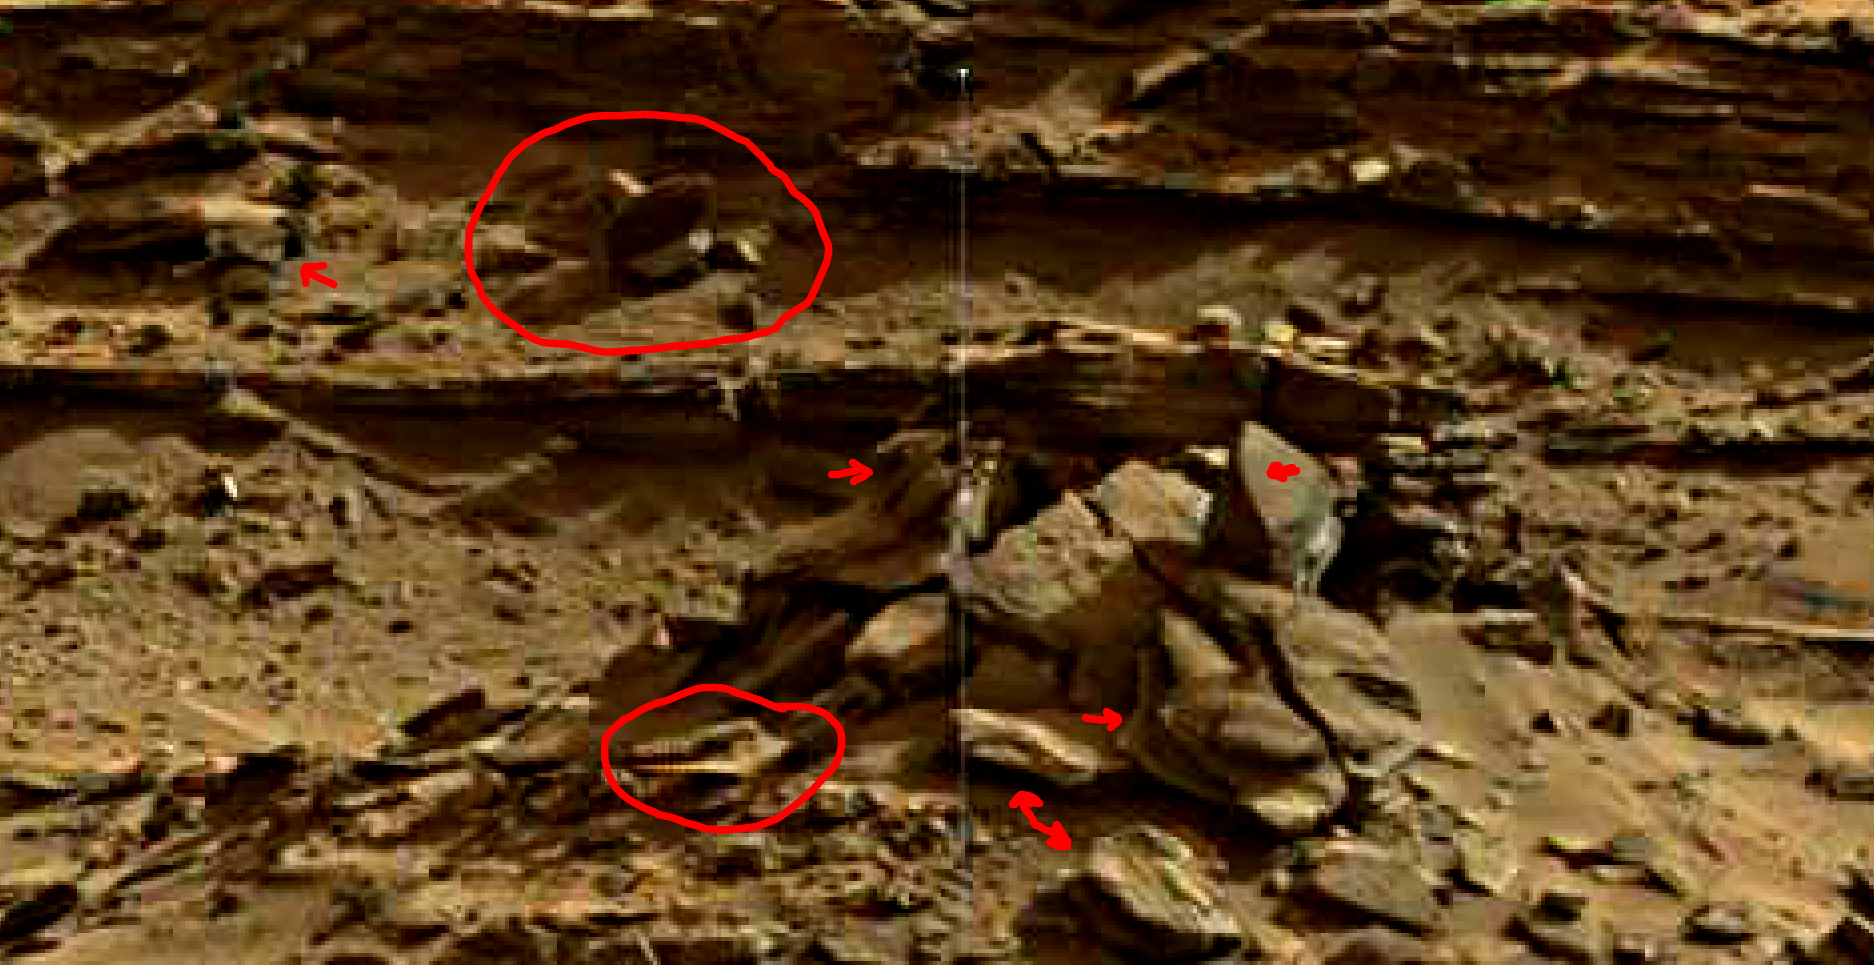 mars sol 1376 anomaly-artifacts 4a was life on mars